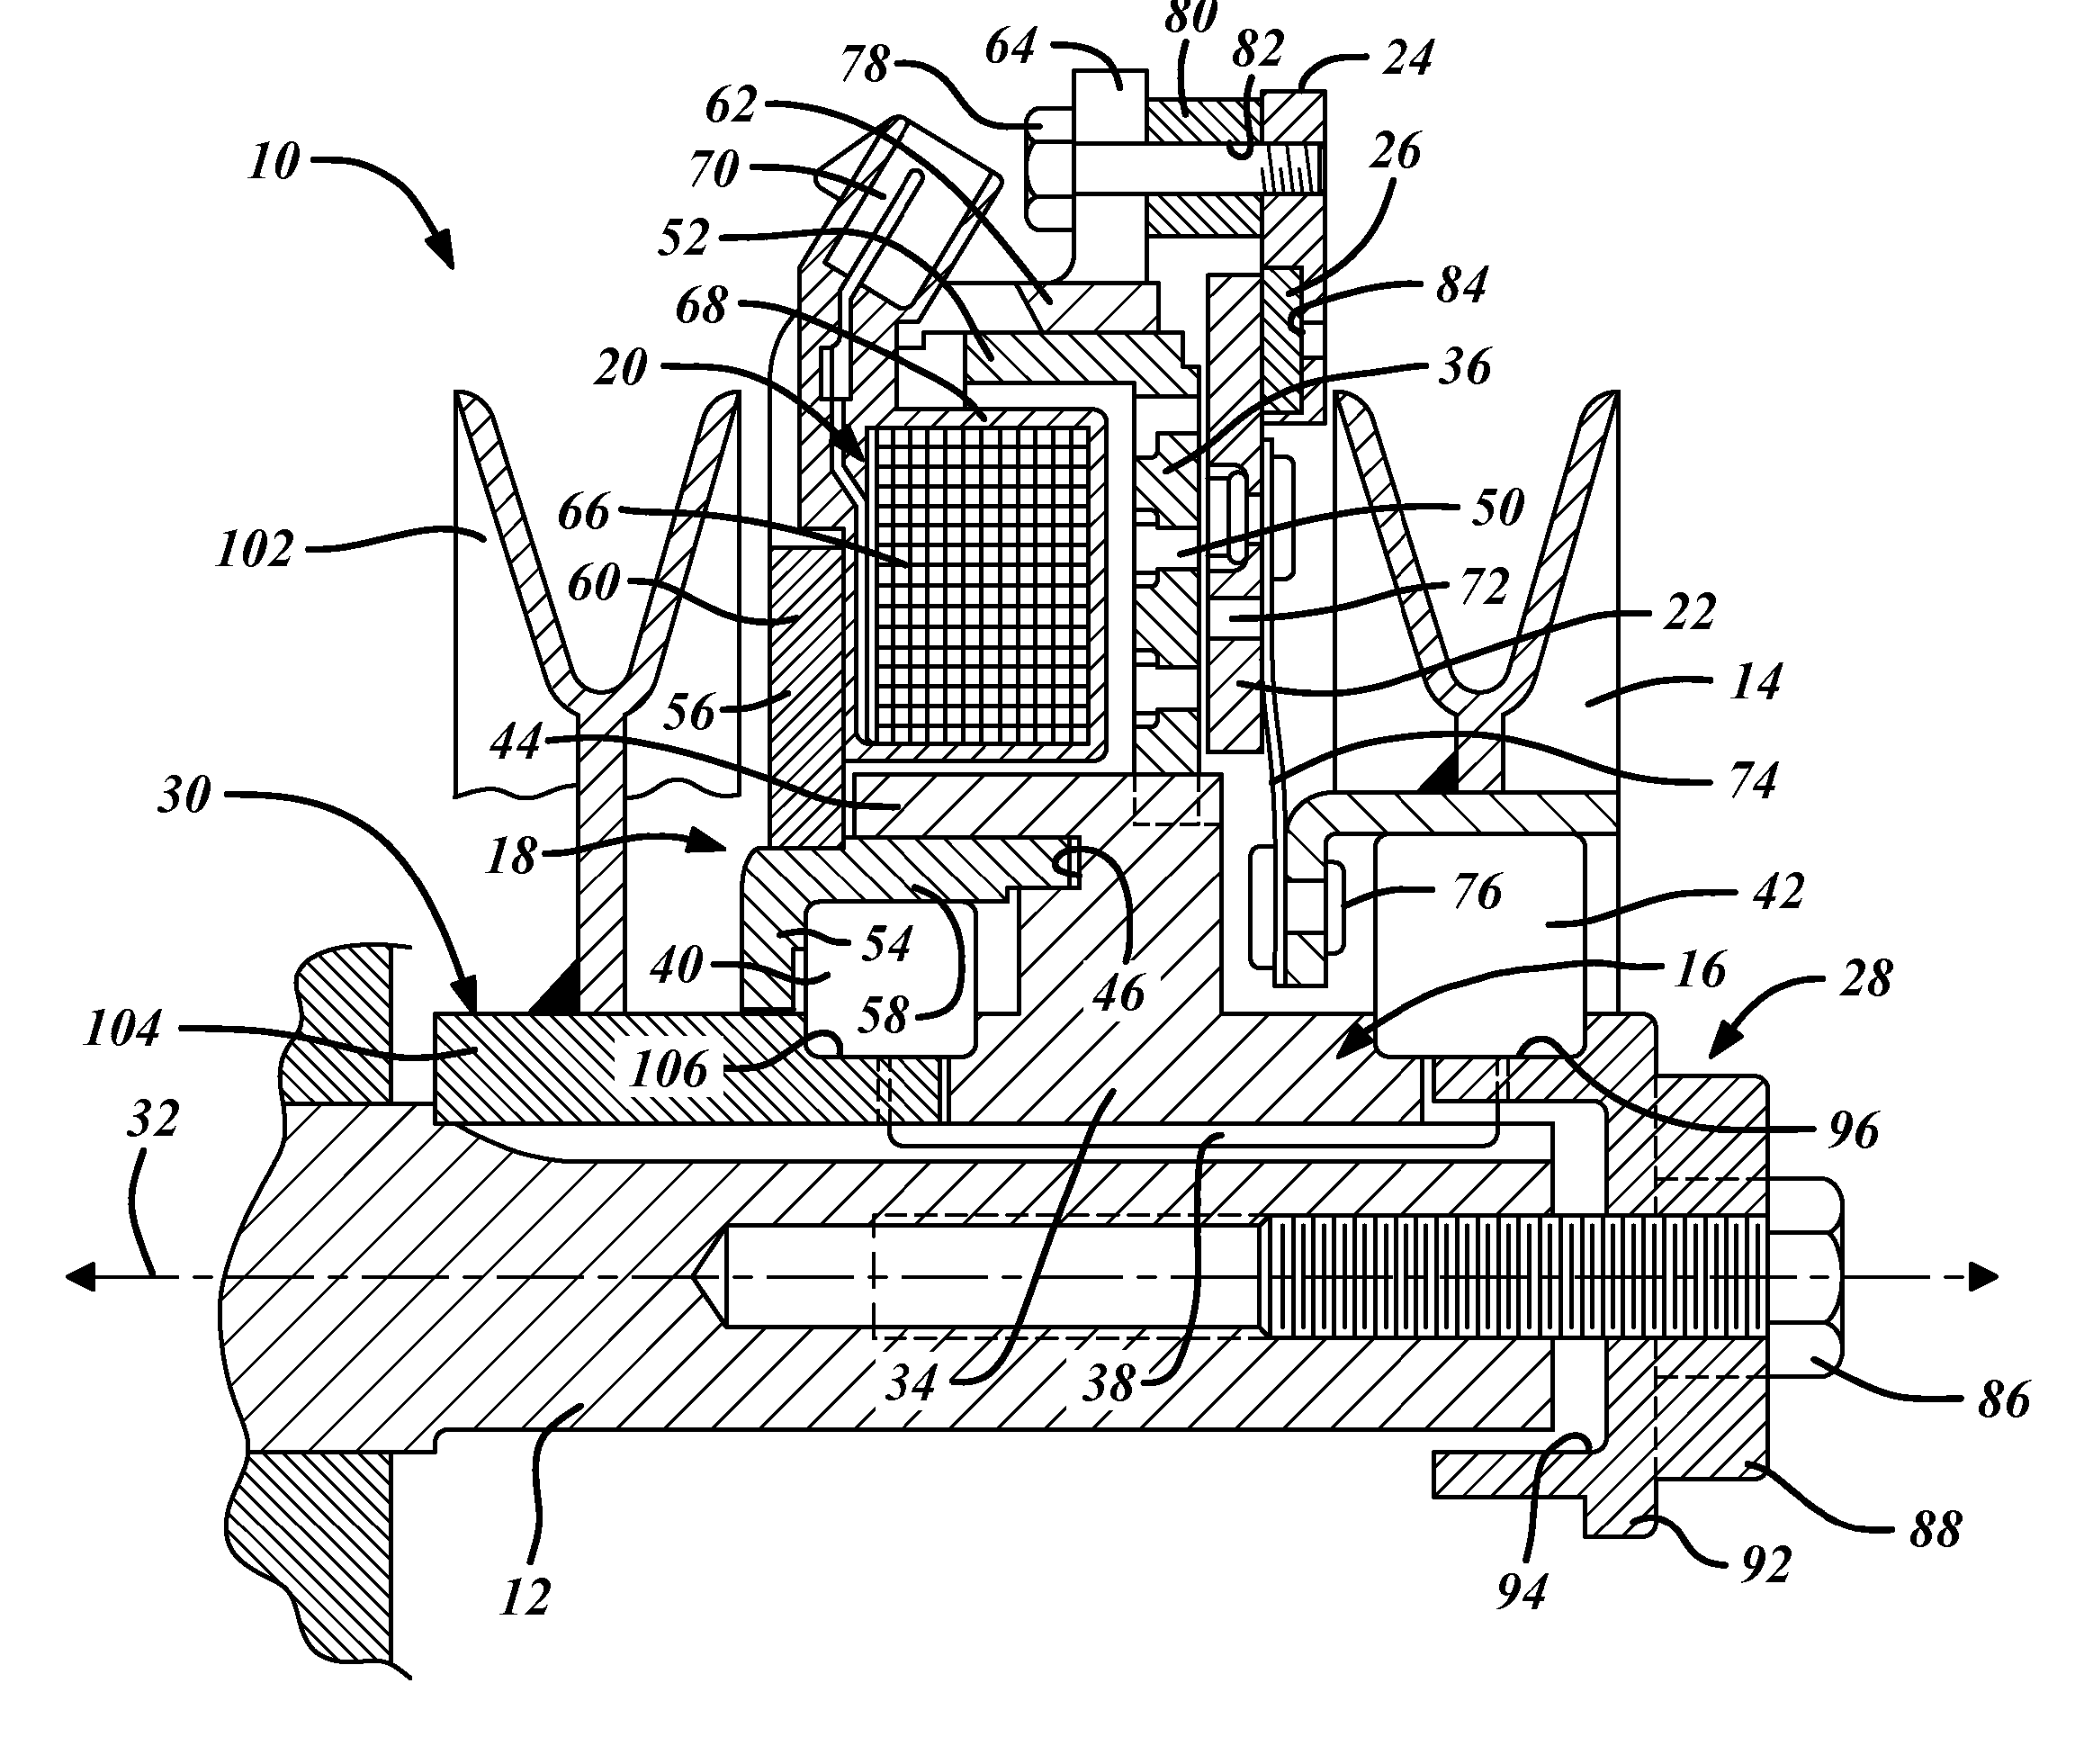 Rotational Coupling Device